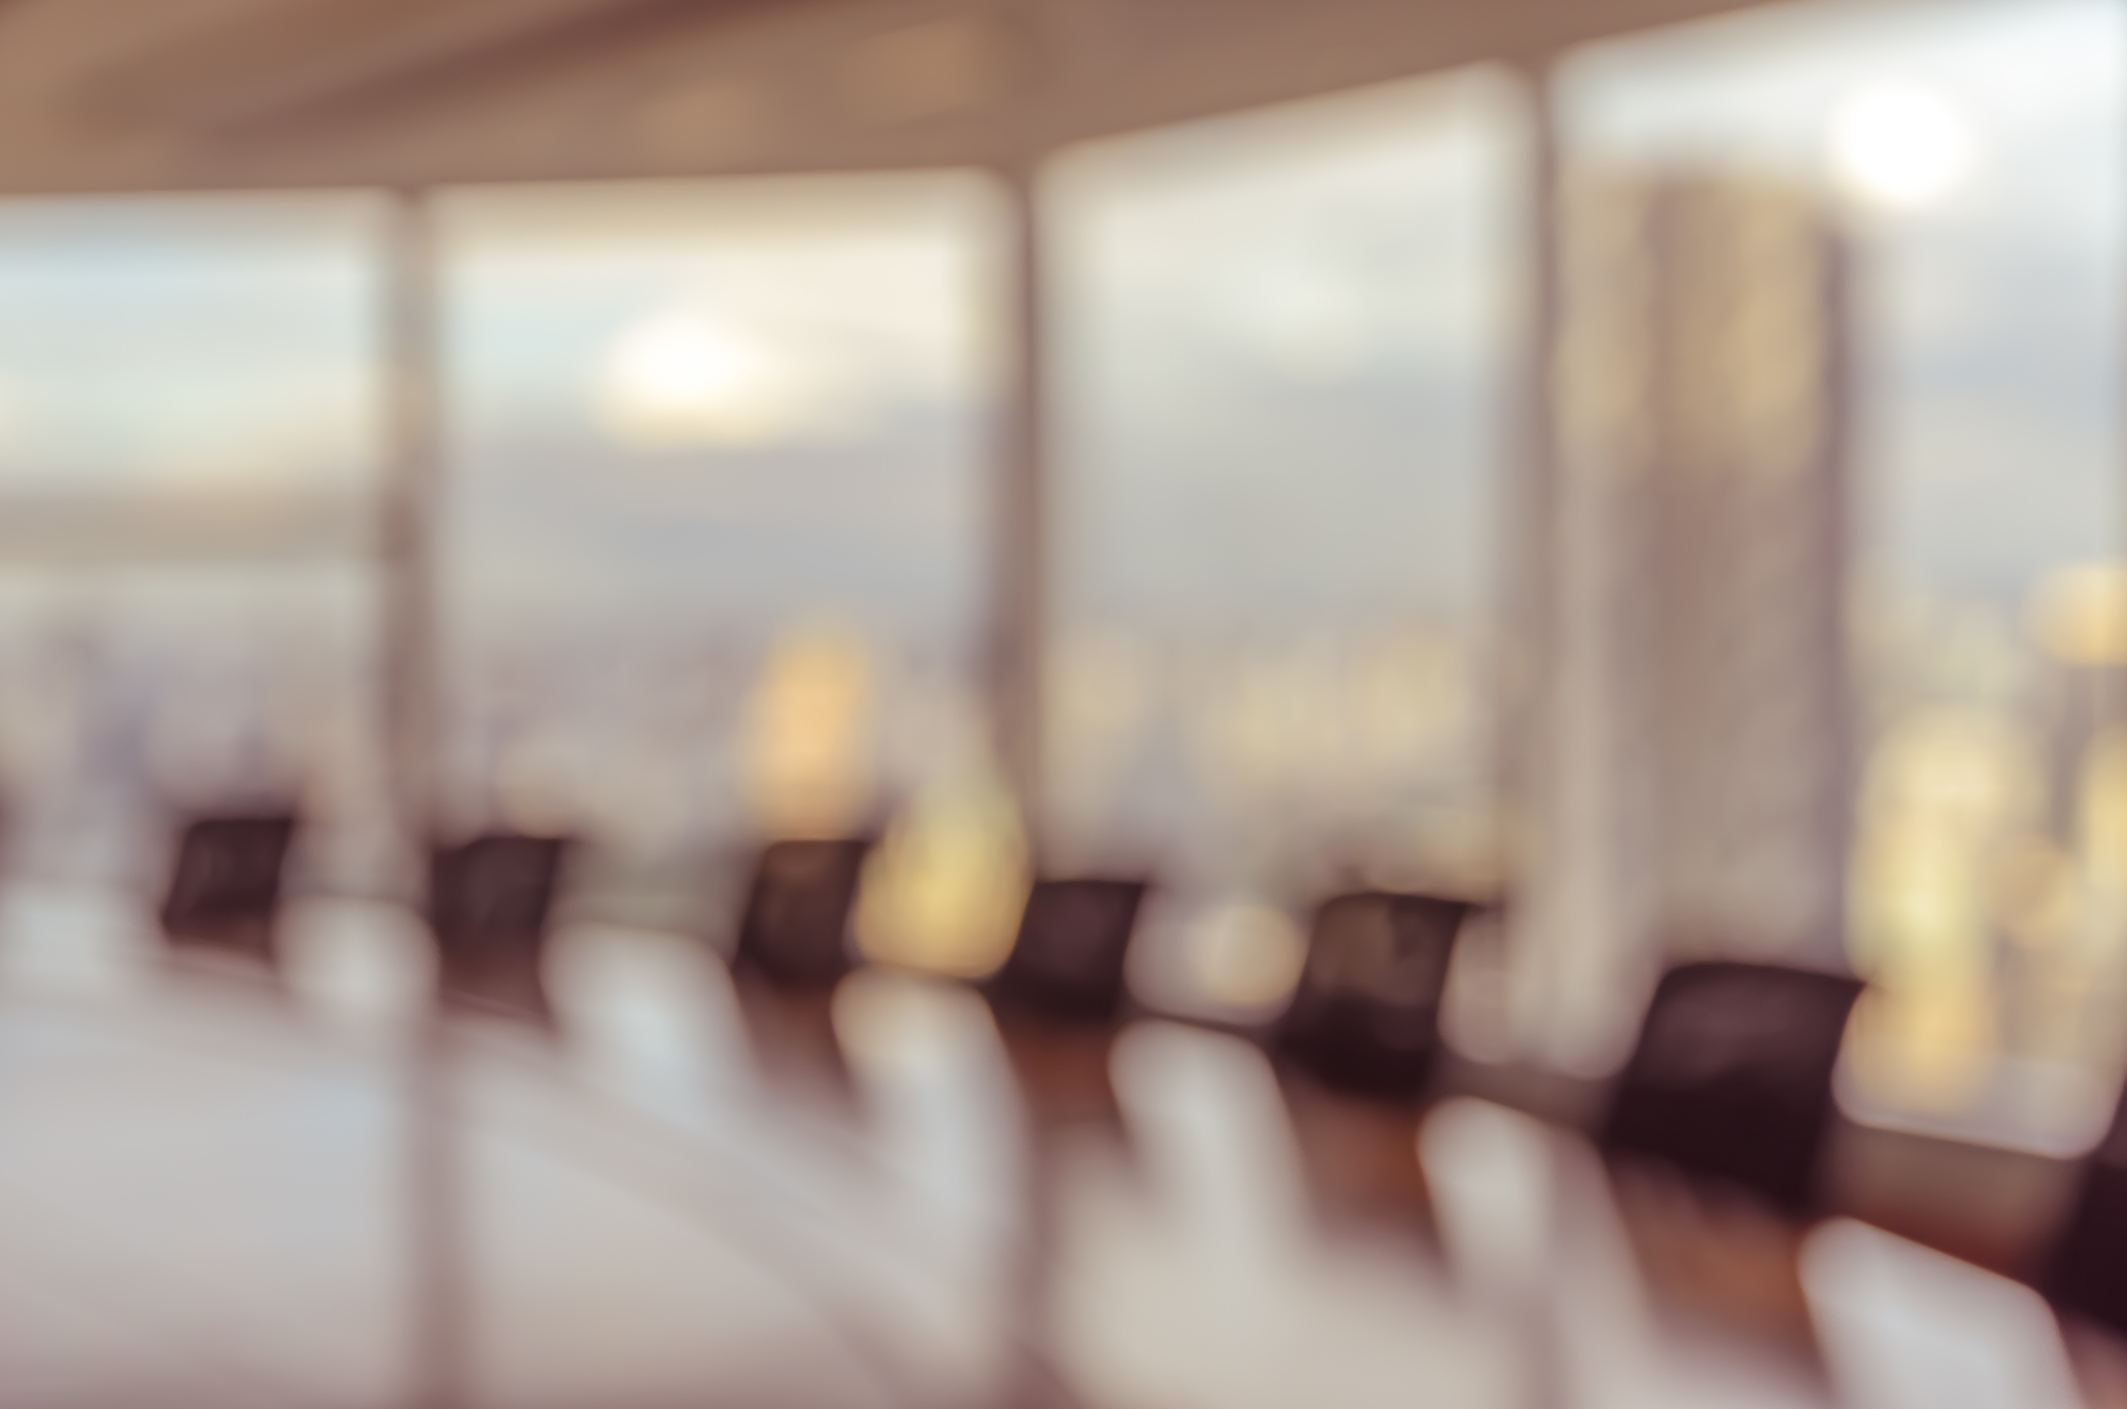 Blur image of empty boardroom with window cityscape background.